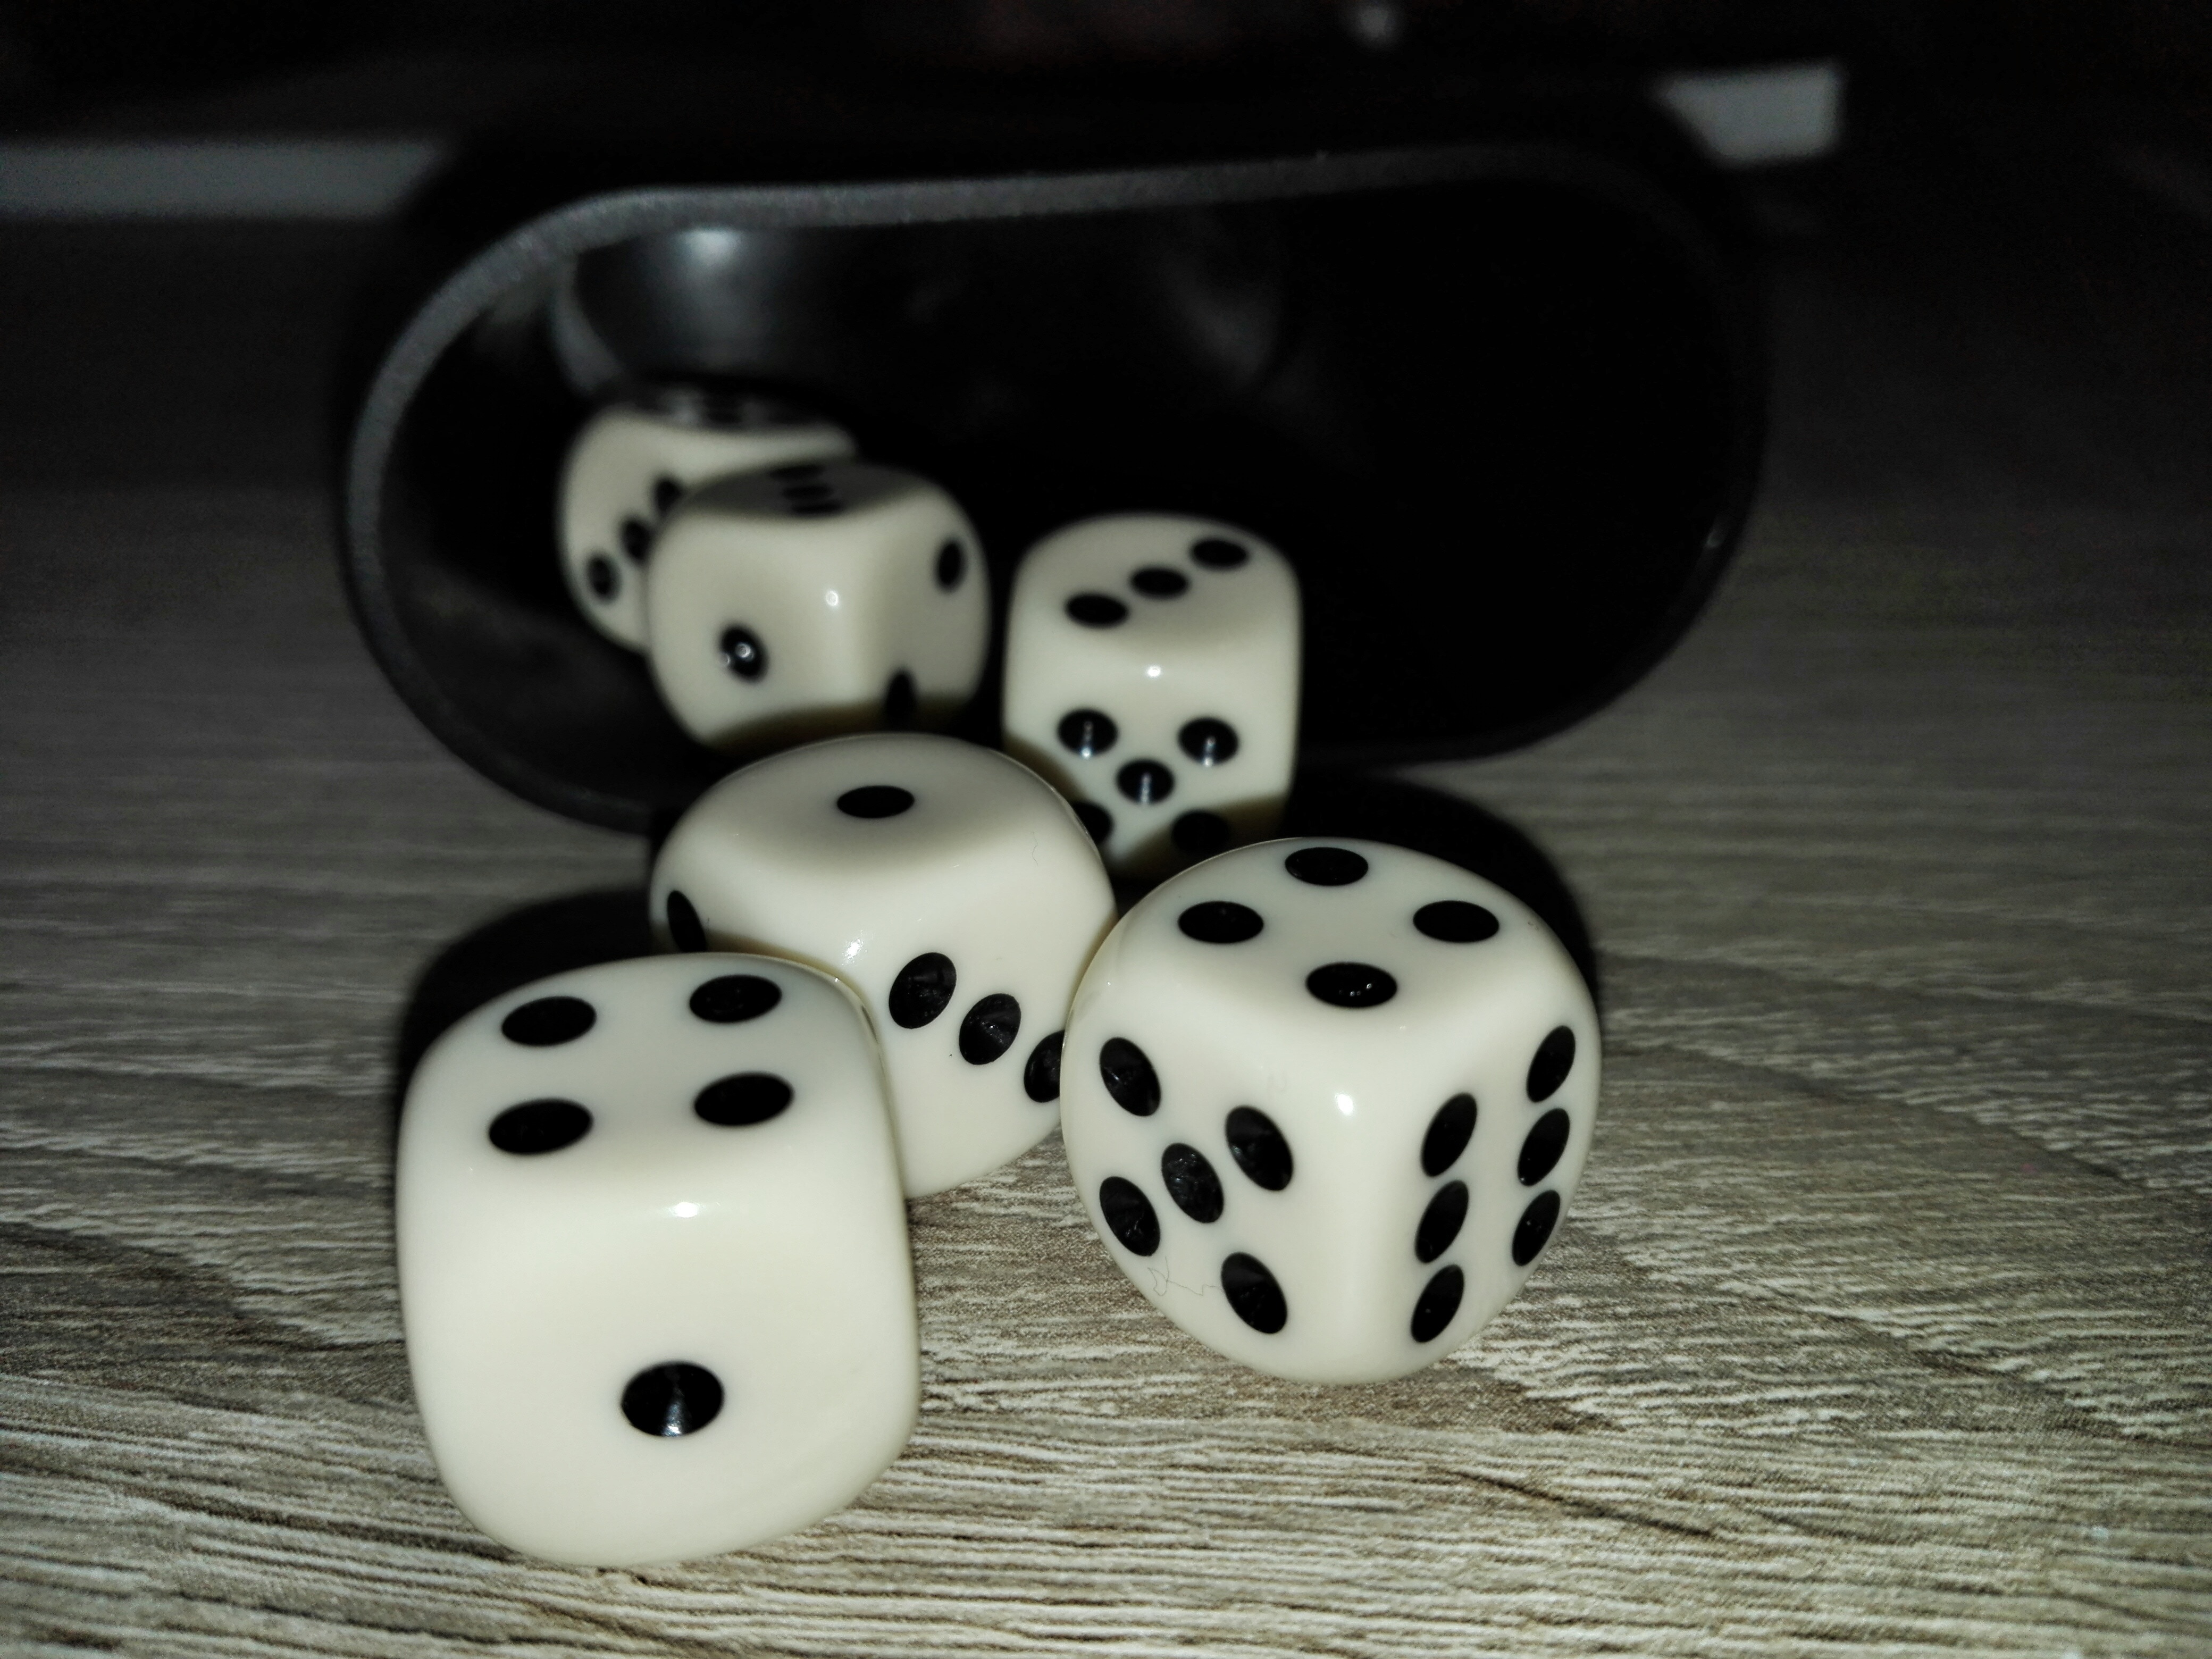 6 white and black dices